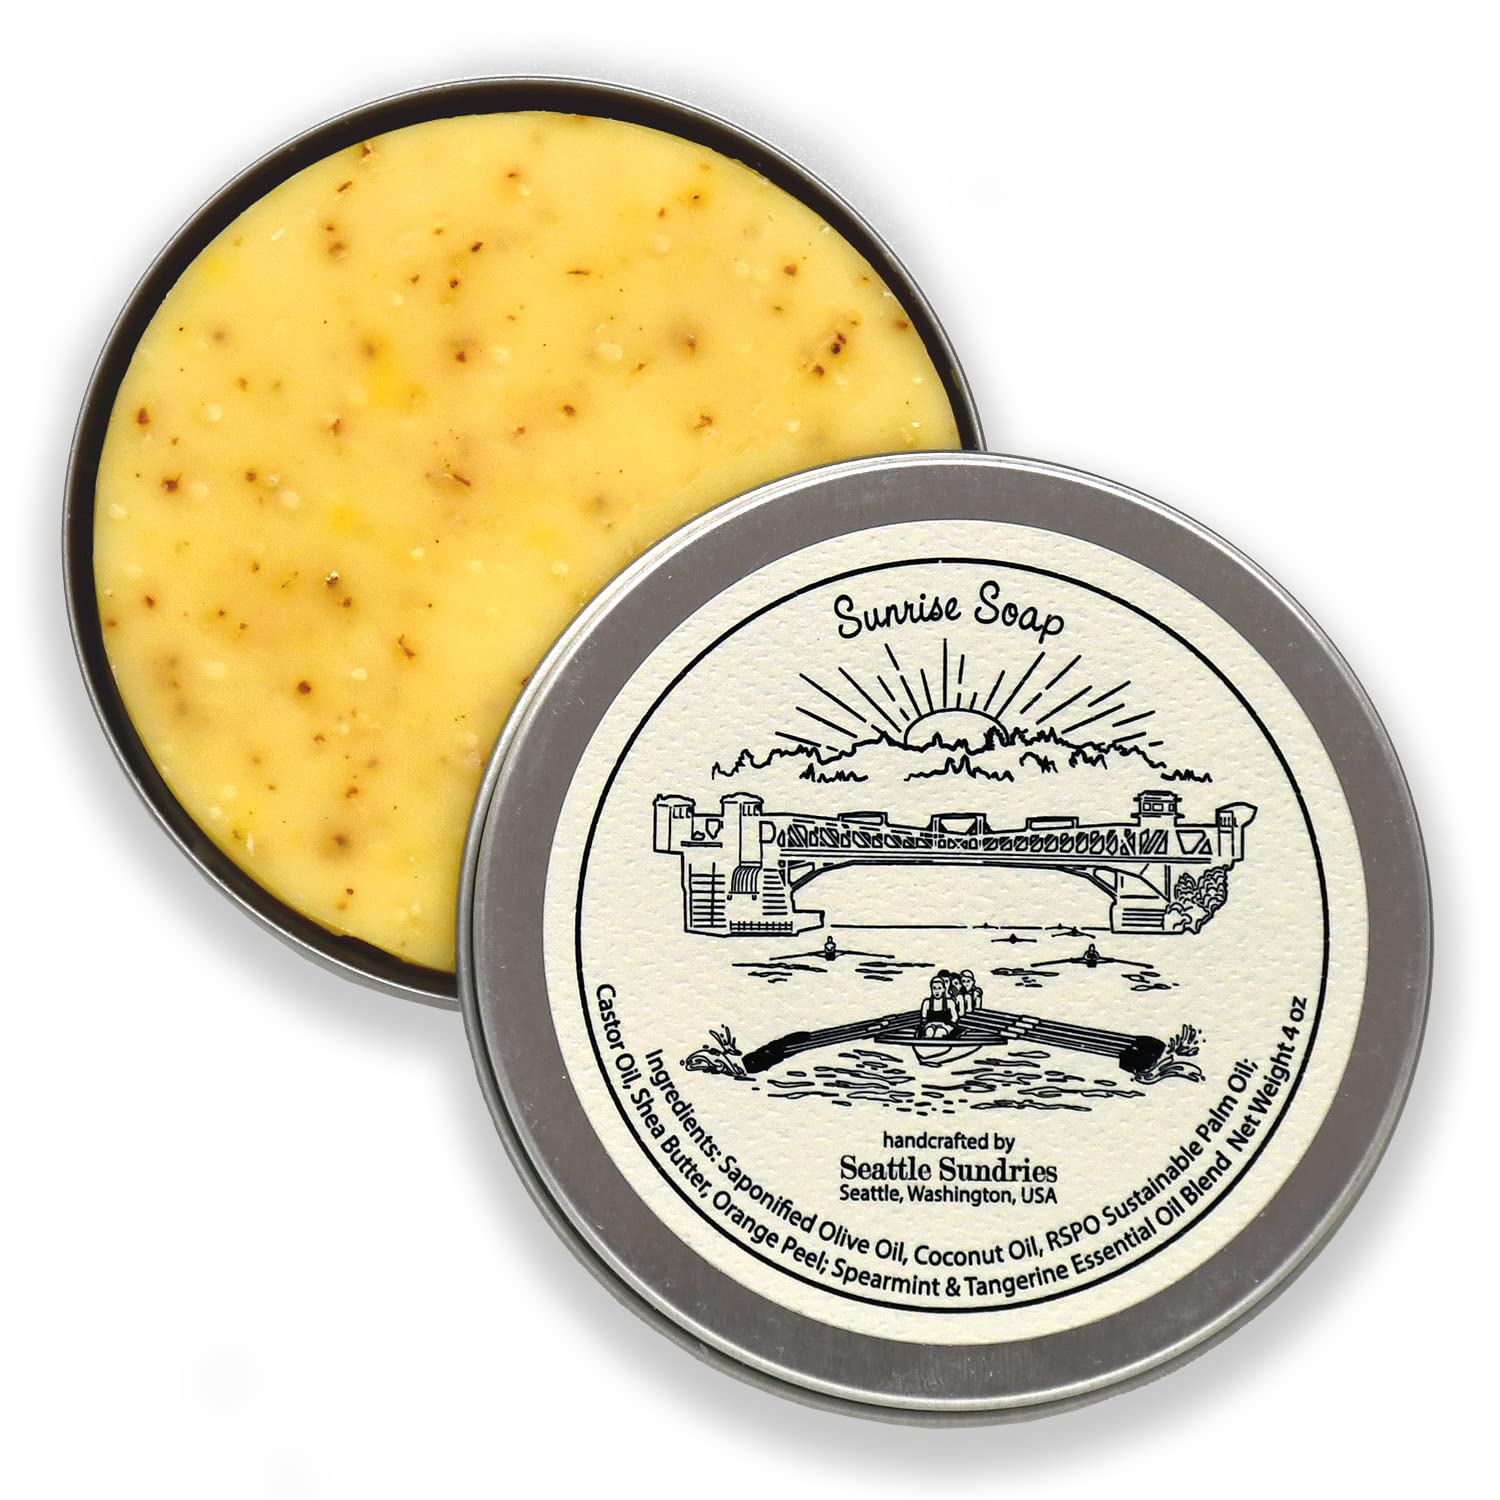 Seattle Sundries | Refreshing Citrus Mint Soap for Women & Men - 1 (4) Moisturizing Shea Butter Bar Soap in a Low Waste Travel Tin - Sports Team Gift Idea